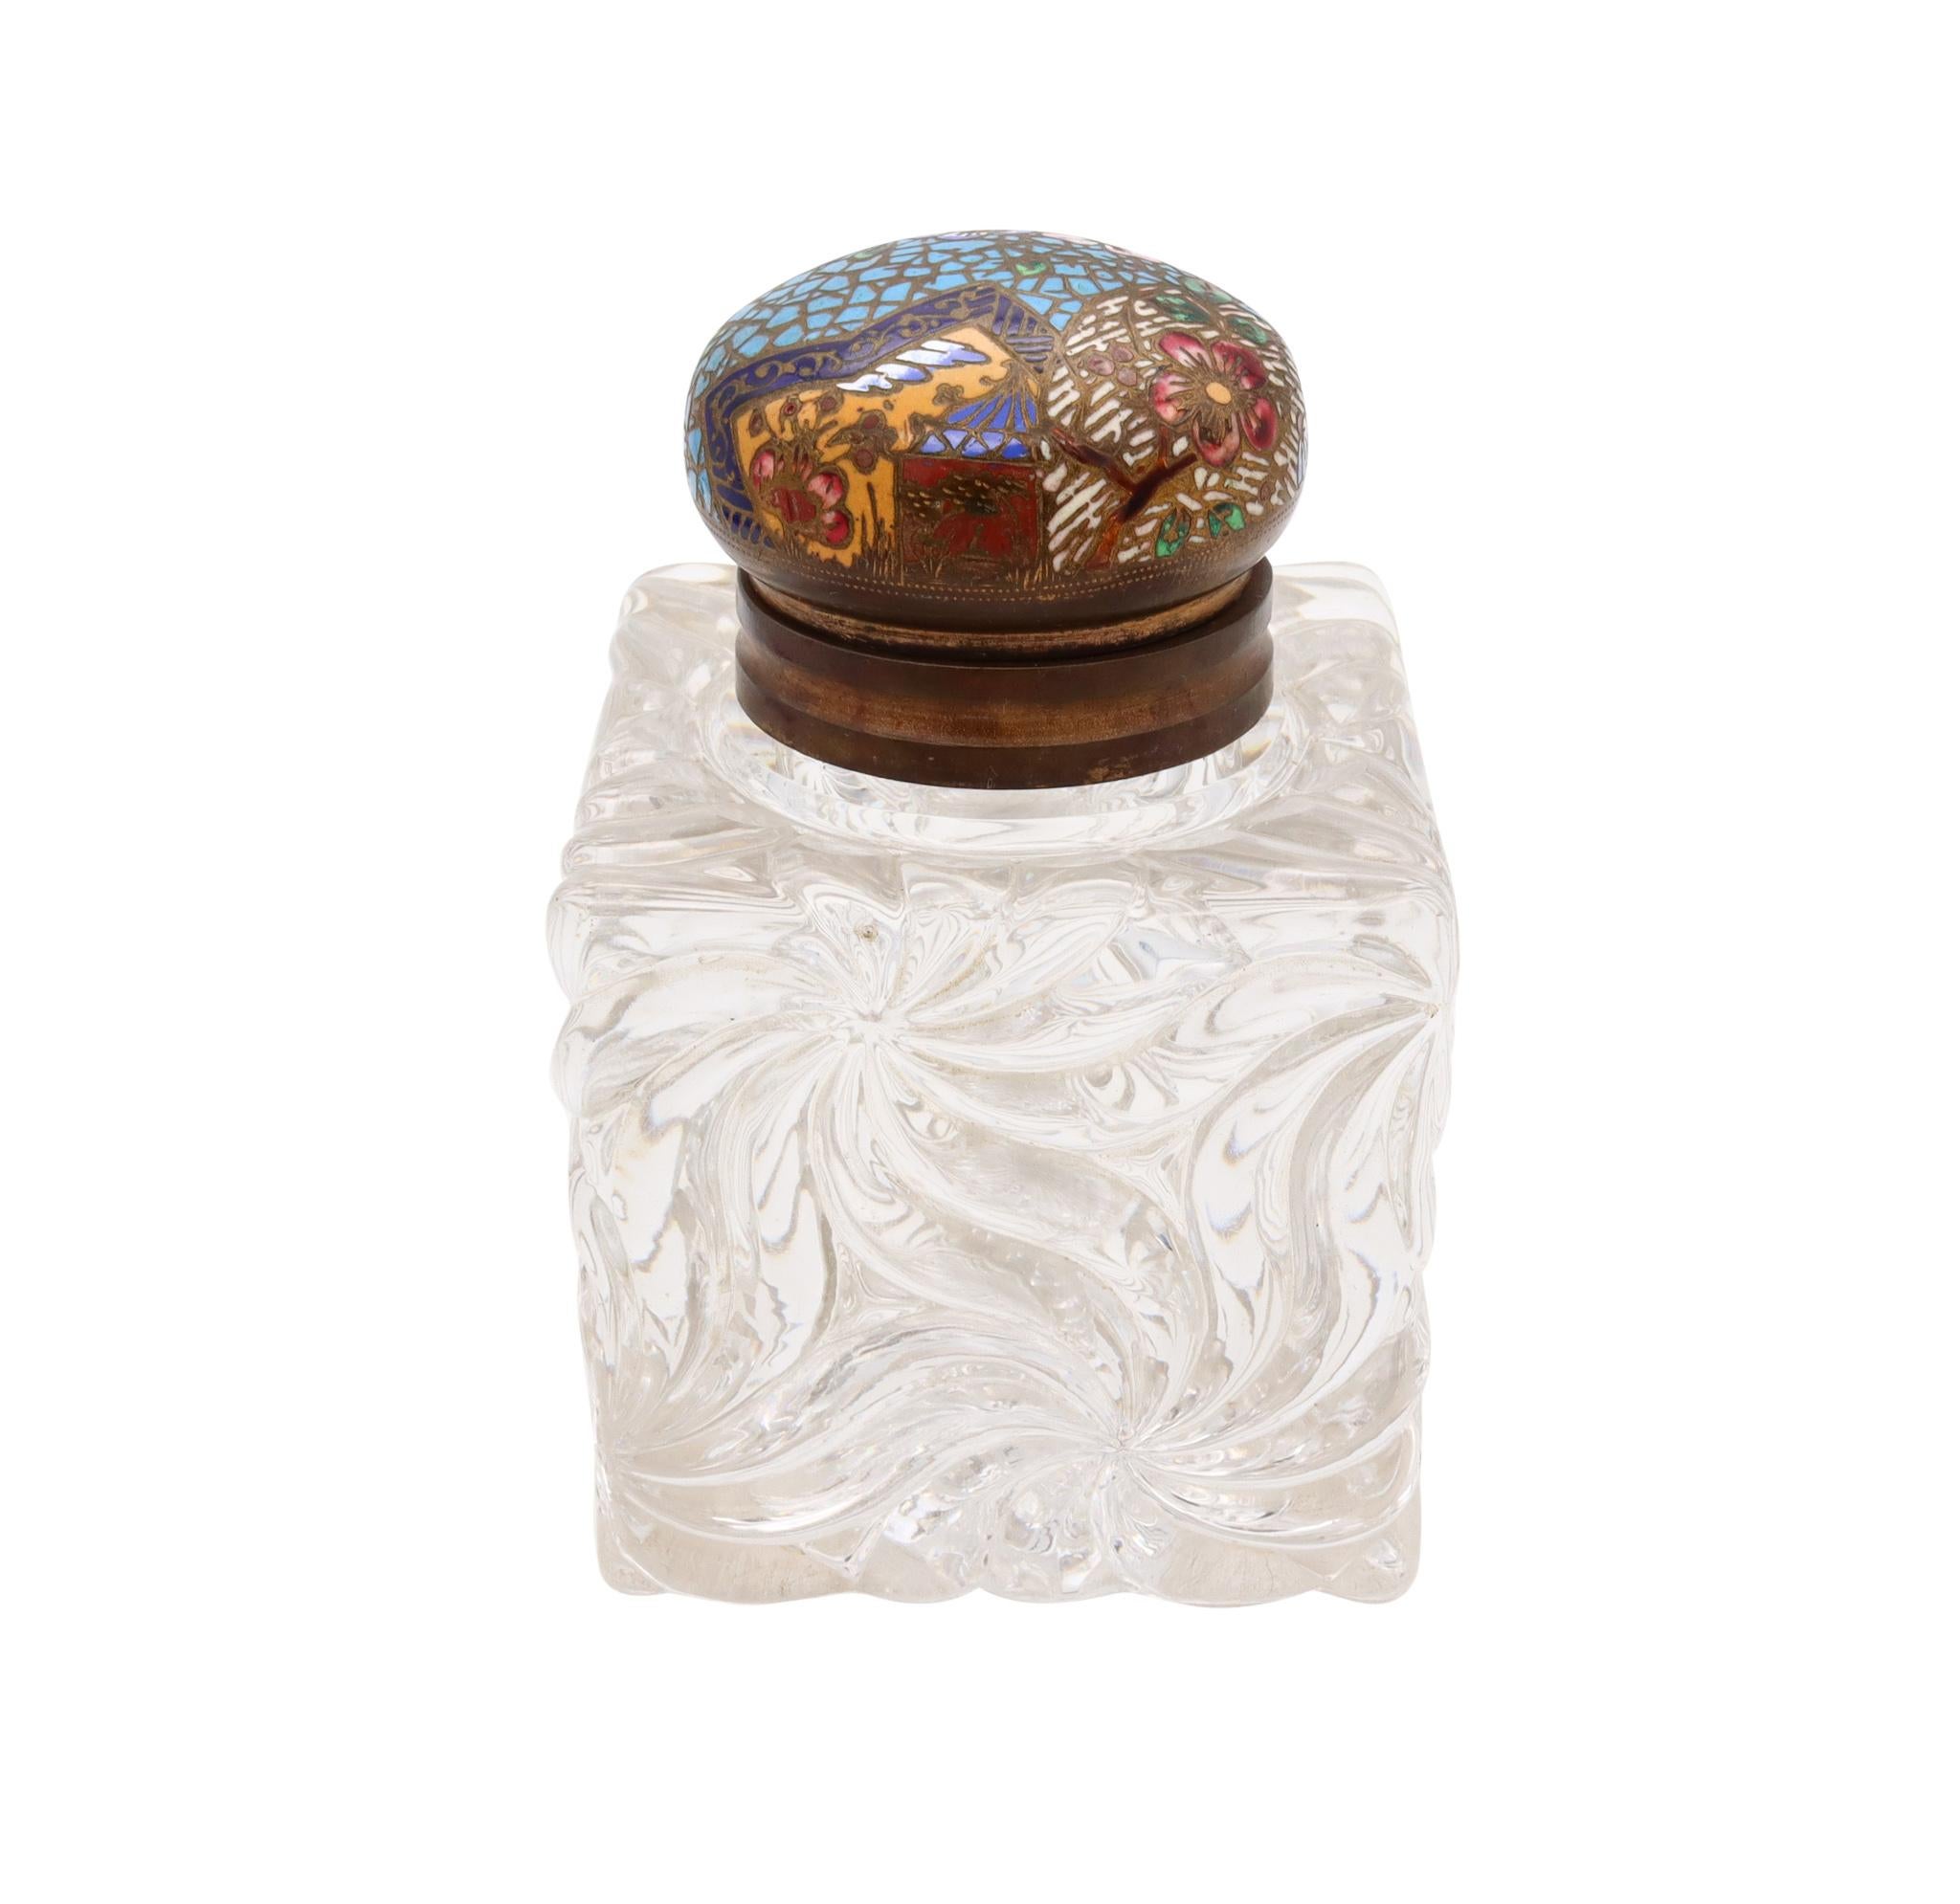 French champlevé inkwell.

An elusive antique inkwell, created in France, with chinoiserie patterns, back in the 1900's. Masterfully crafted in solid cut crystal and bronze ormolu. The hinged bronze lid on top is decorated with applications of hot